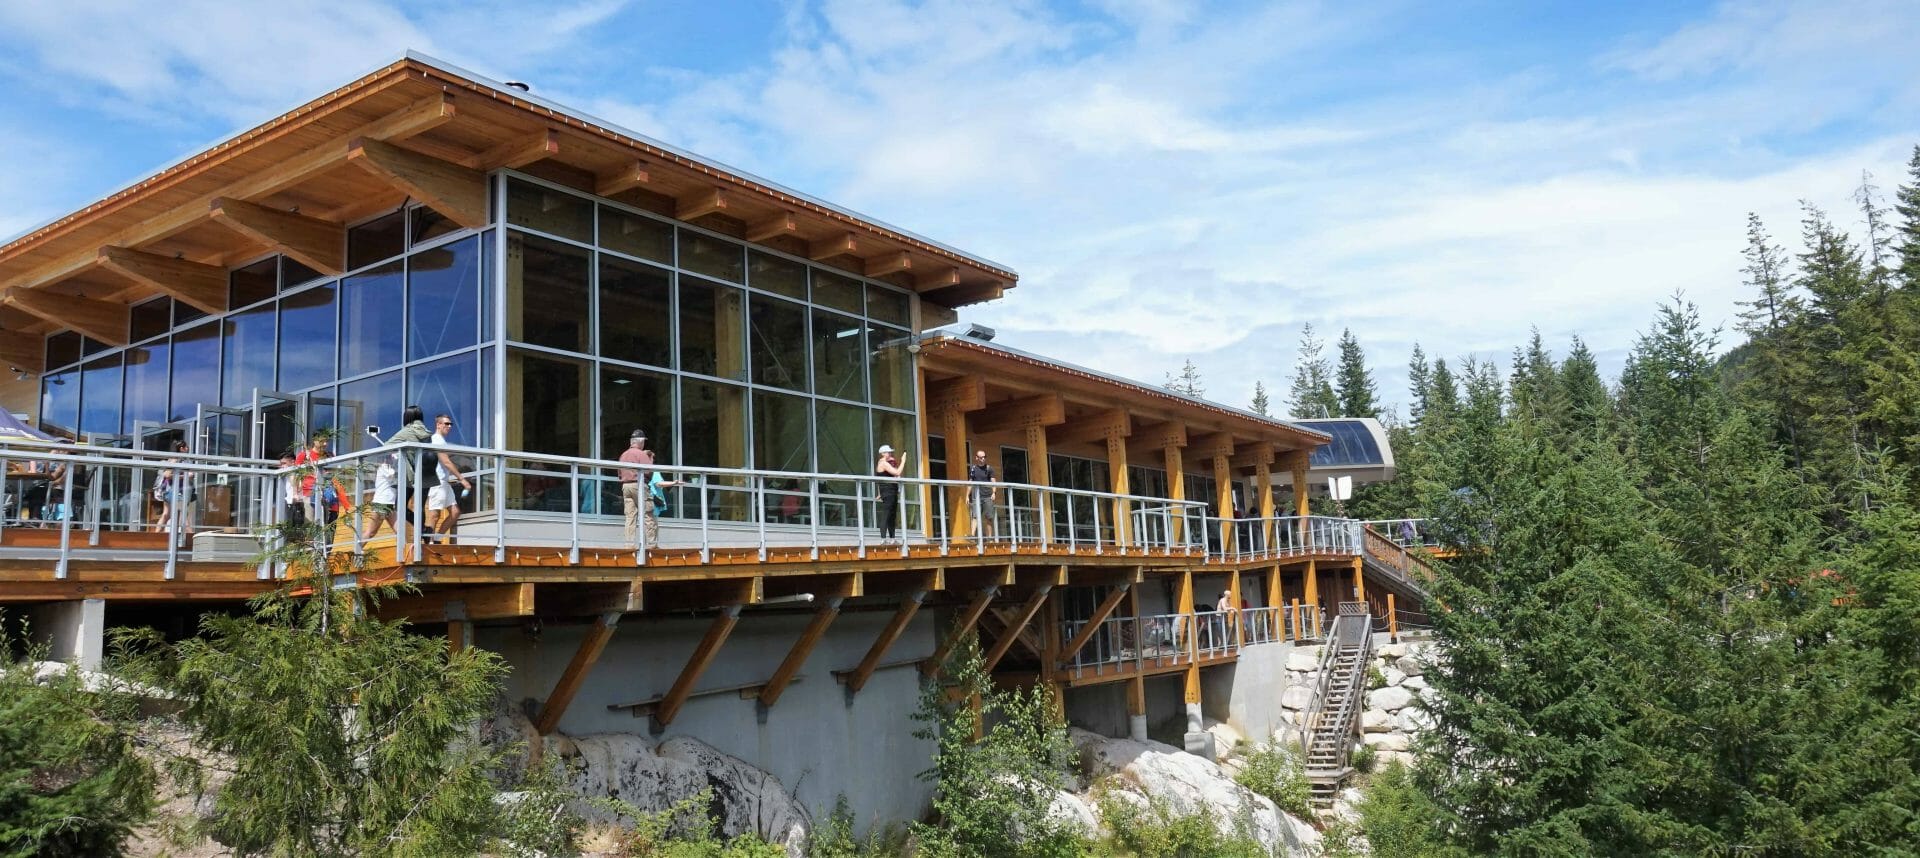 Lodge at the top of the Sea to Sky Gondola